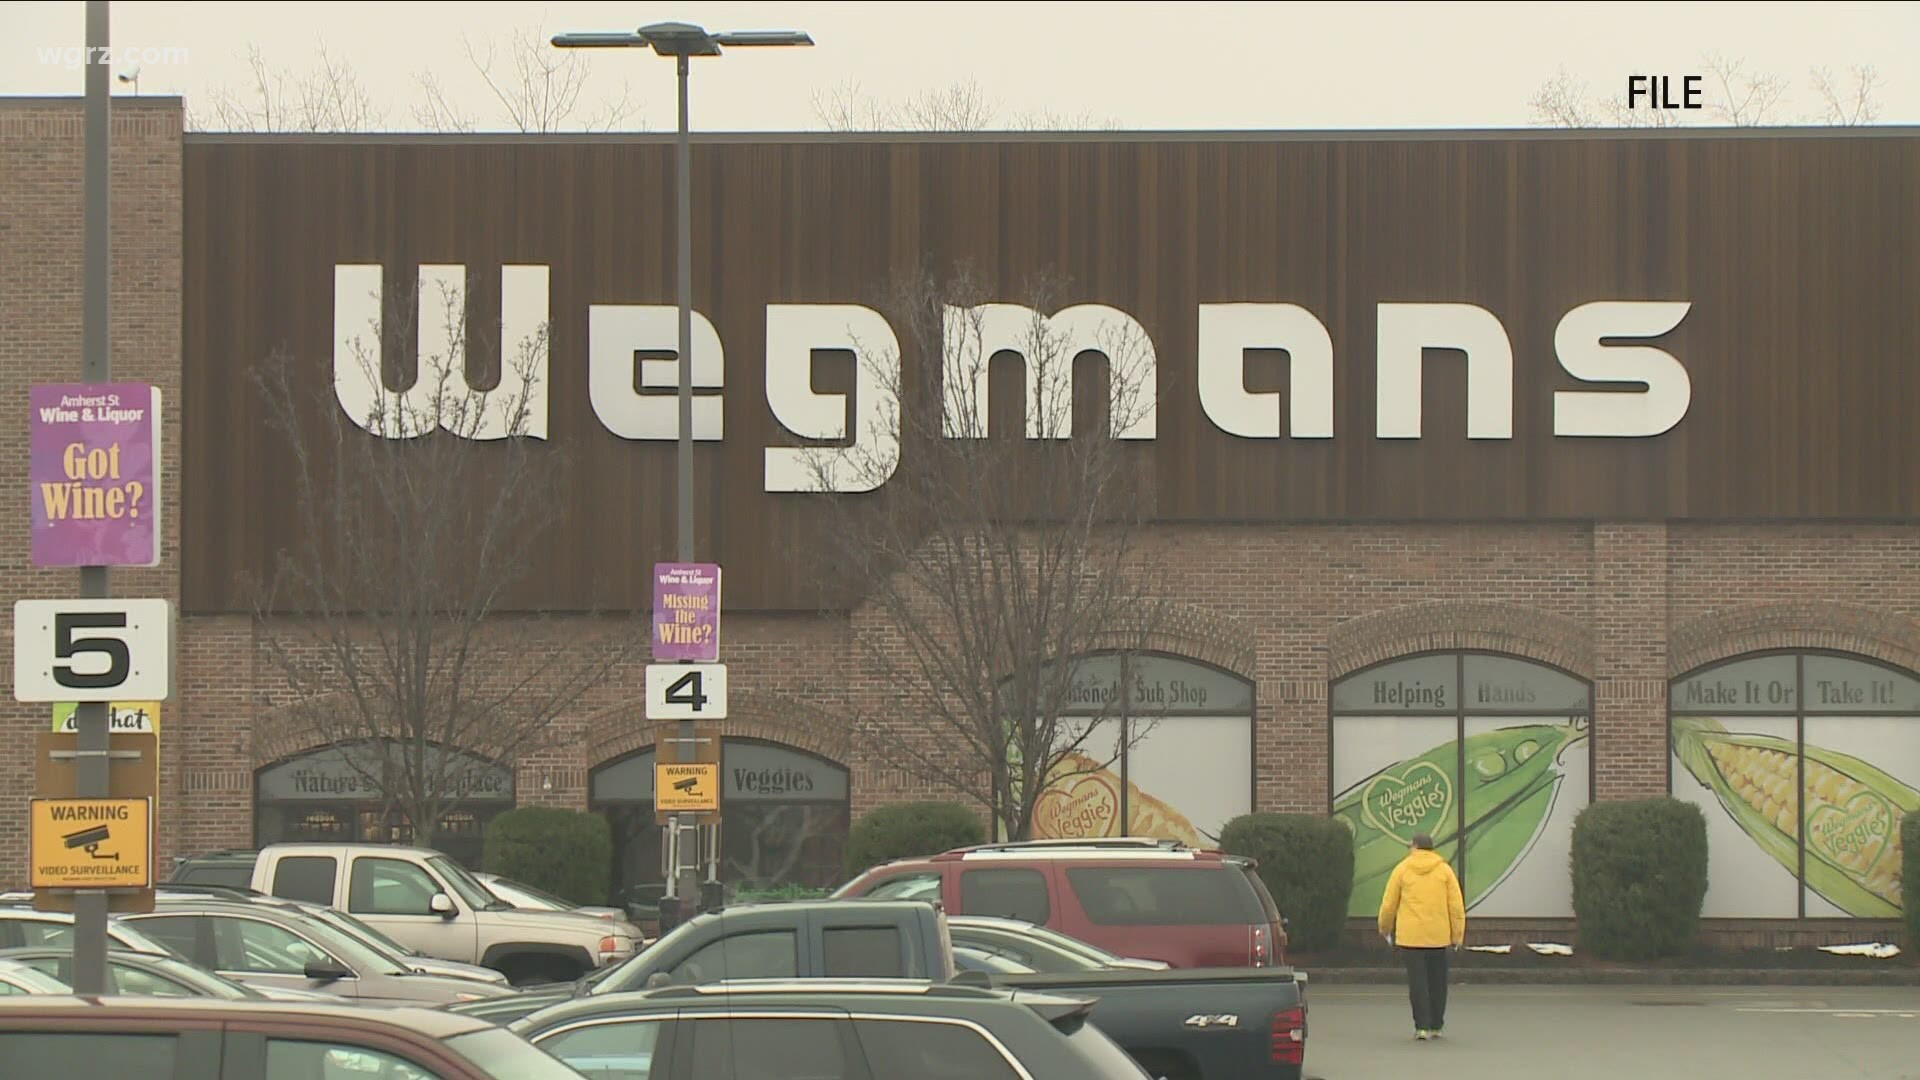 Wegmans prepared for holiday shoppers